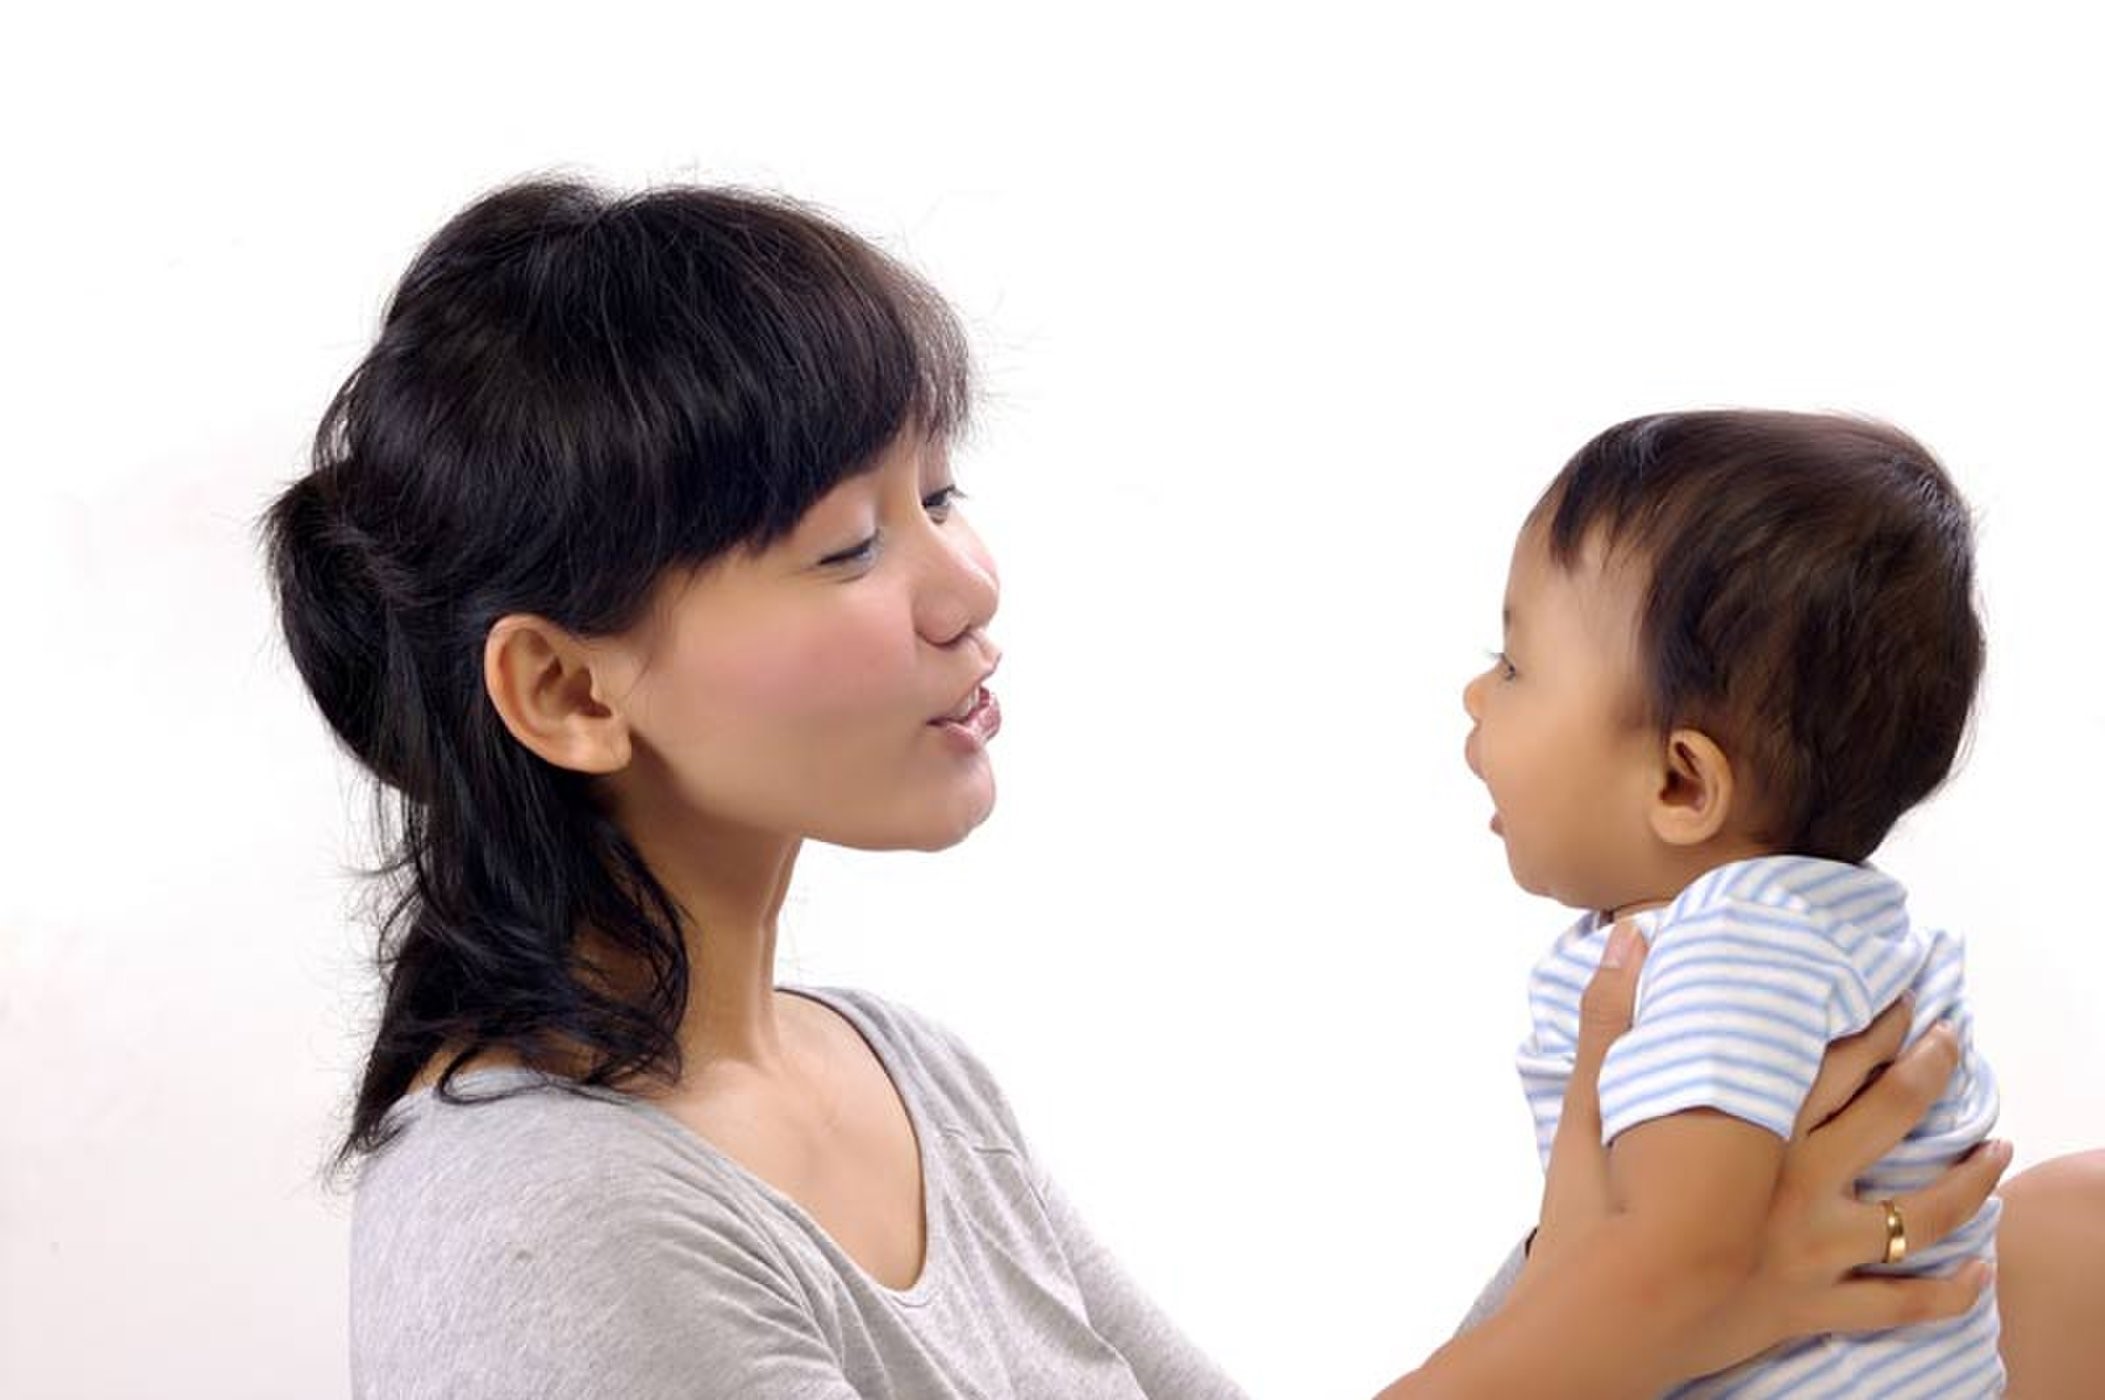 Mother-baby synchrony shows the start of language acquisition 